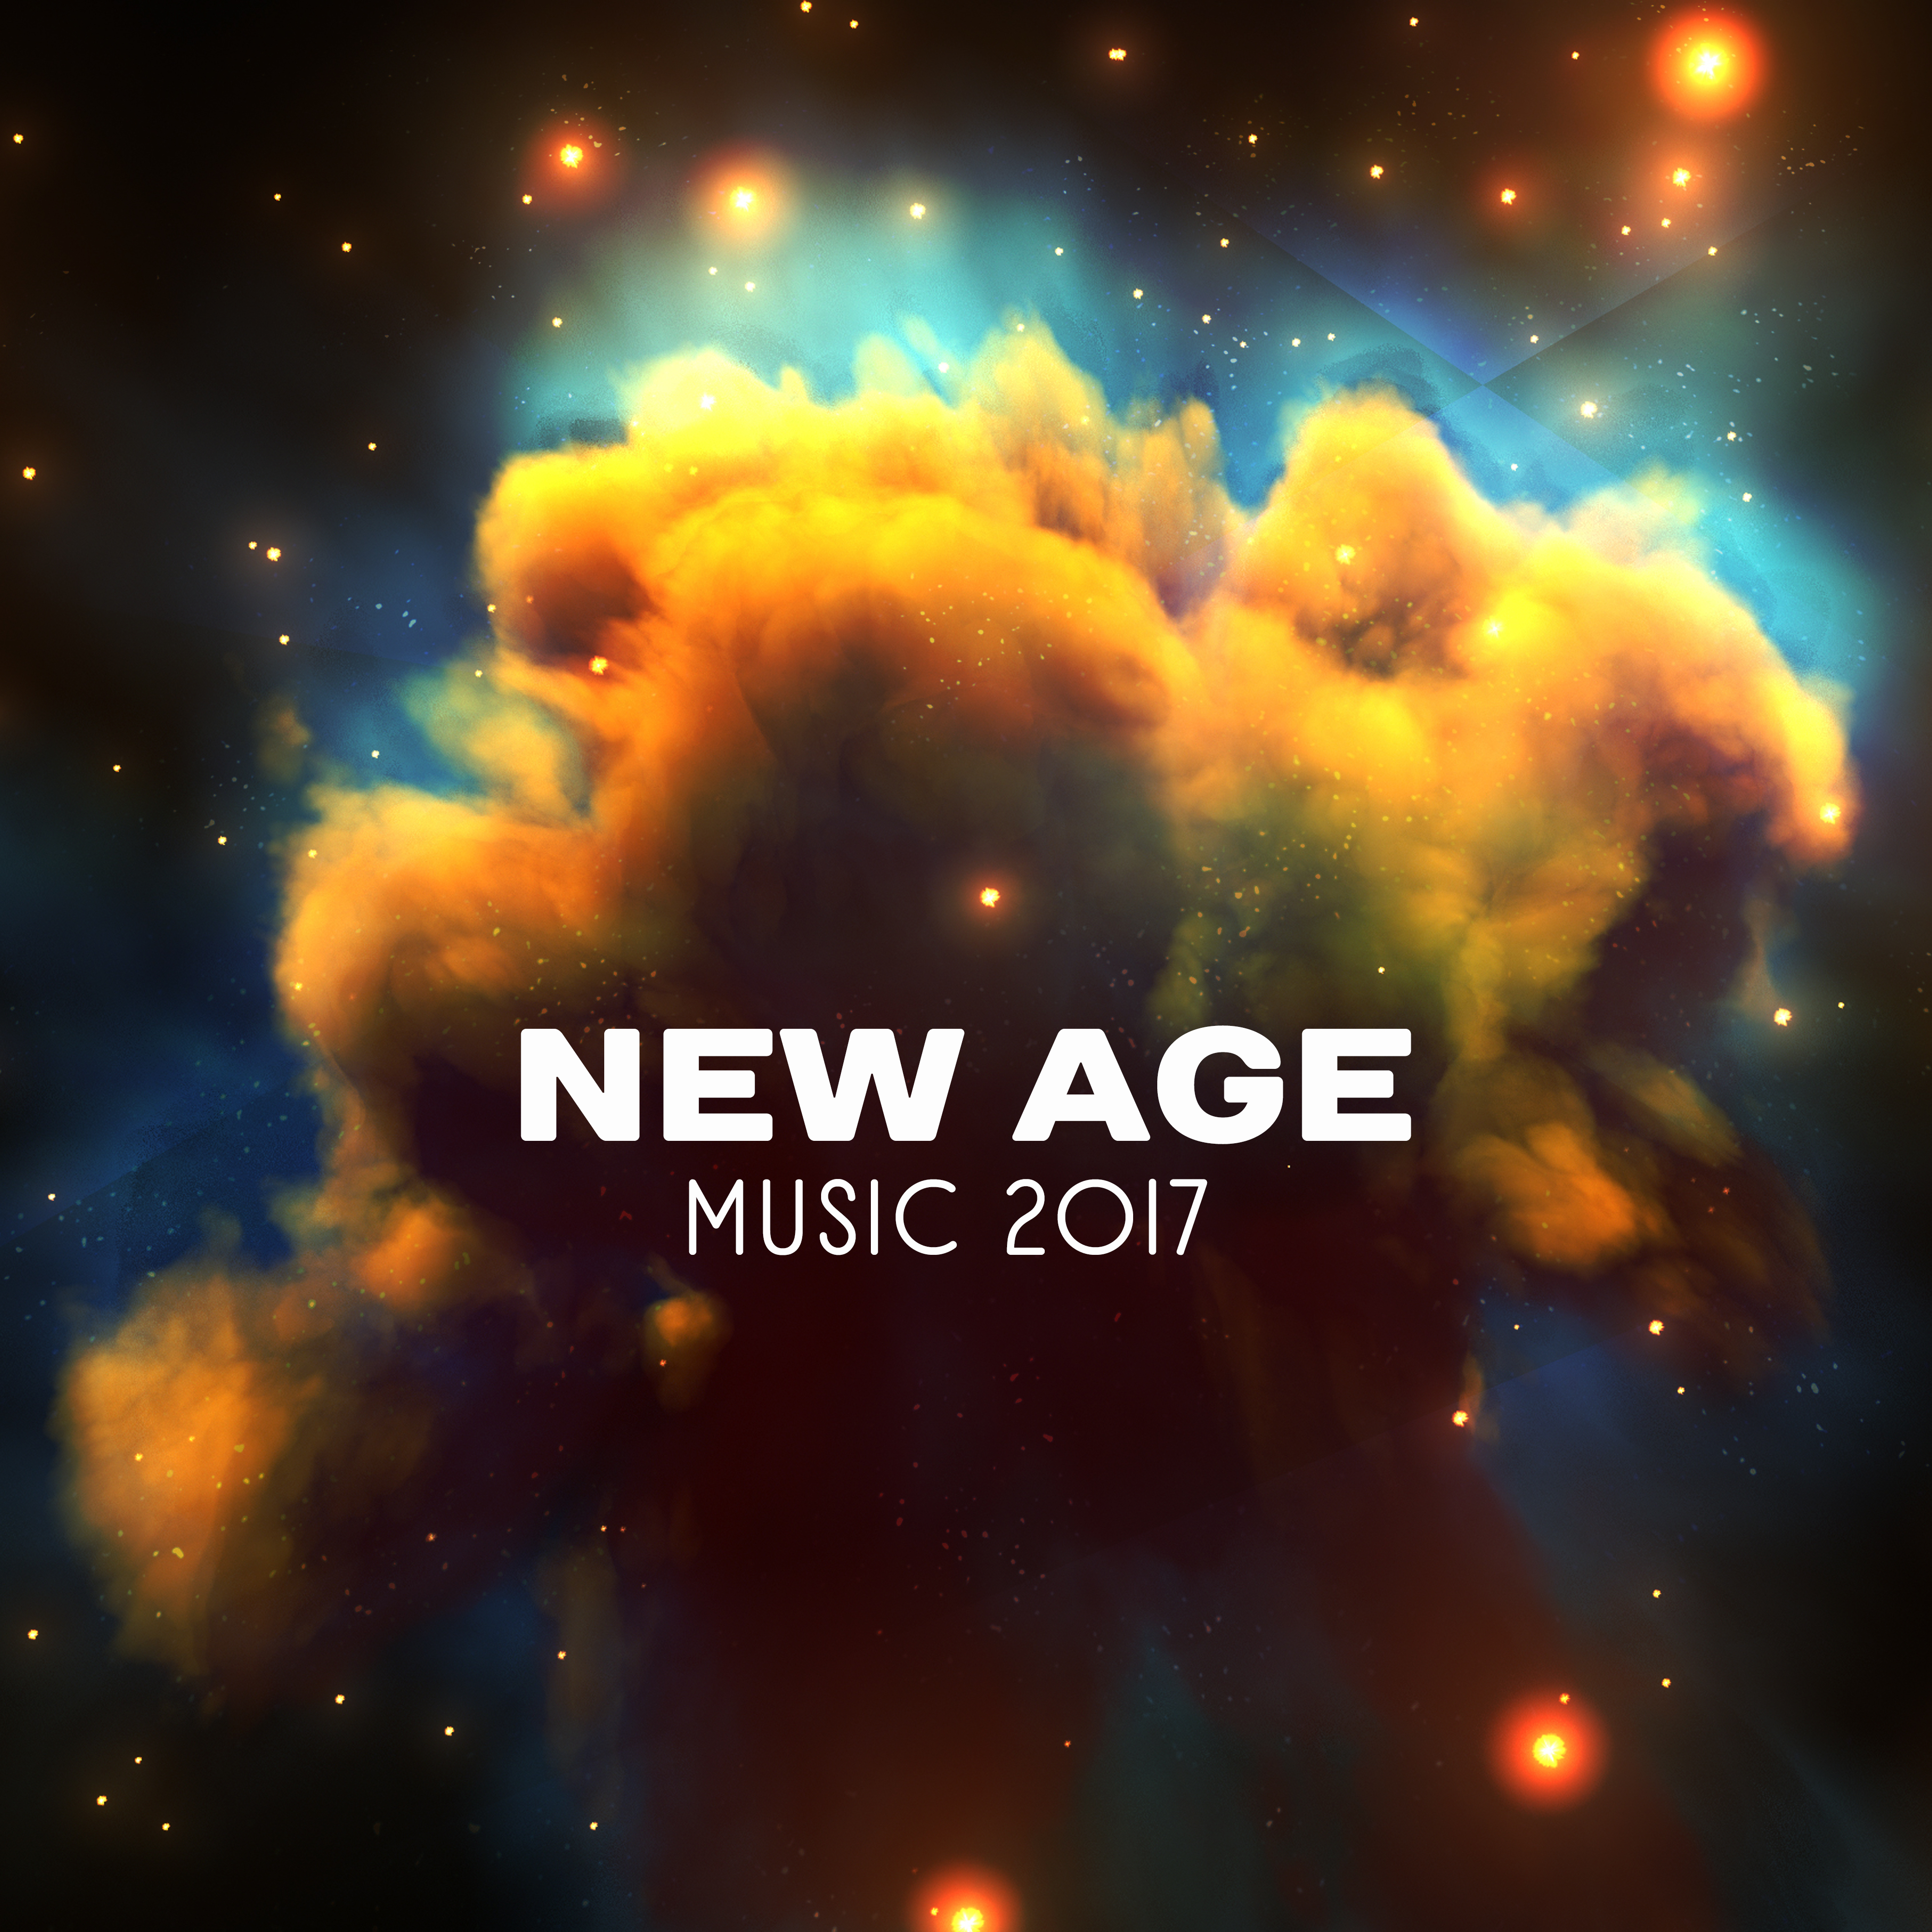 New Age Music 2017 – Relaxing Nature Sounds, Music for Massage, Meditation, Relaxation, Relief Stress